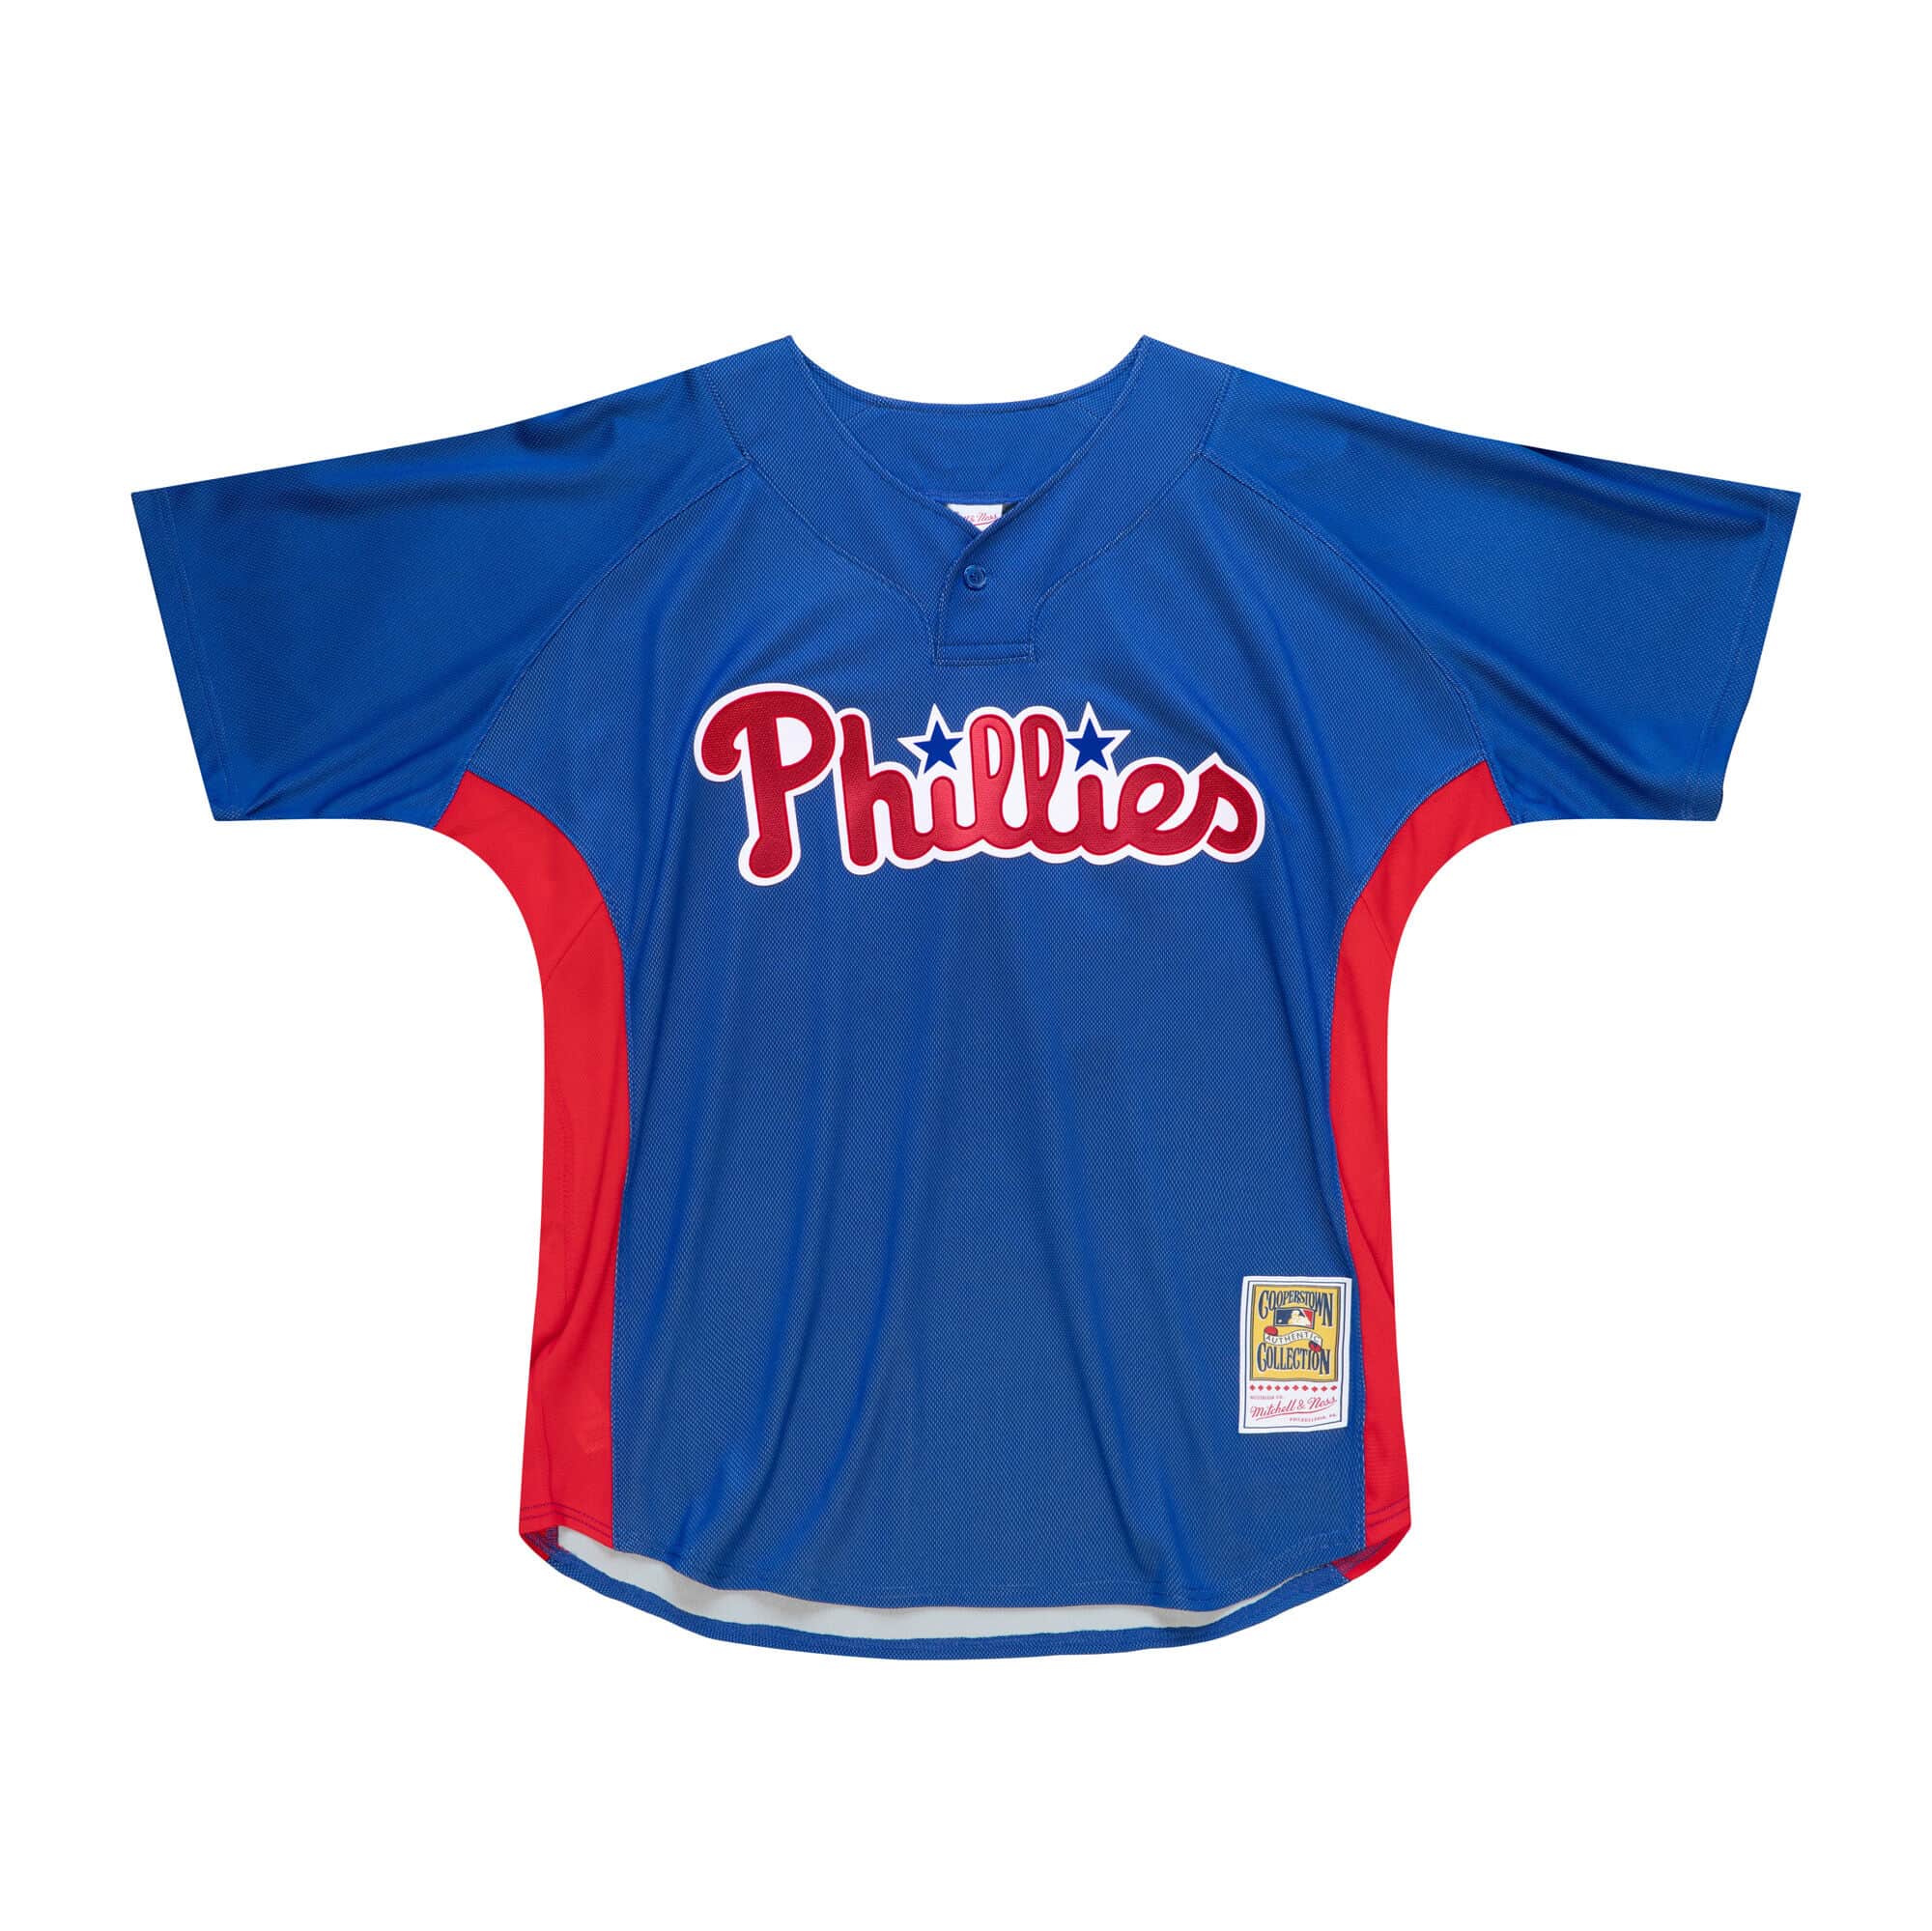 Youth Philadelphia Phillies Roy Halladay Mitchell & Ness Royal Cooperstown  Collection Mesh Batting Practice Jersey